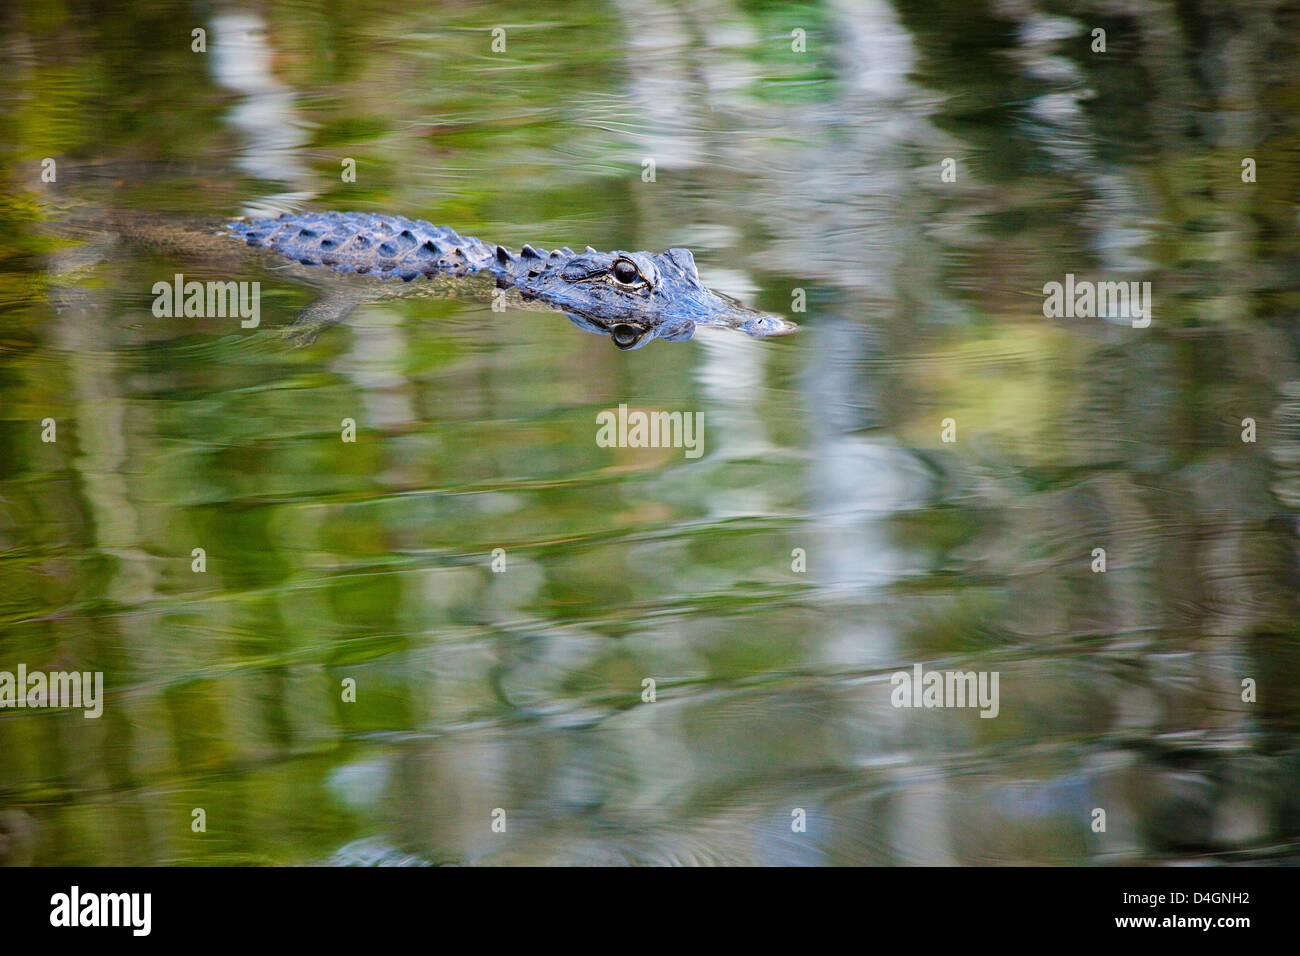 An American alligator, Alligator mississippiensis, on a surface reflection of foliage, Everglades National Park, Florida. Stock Photo